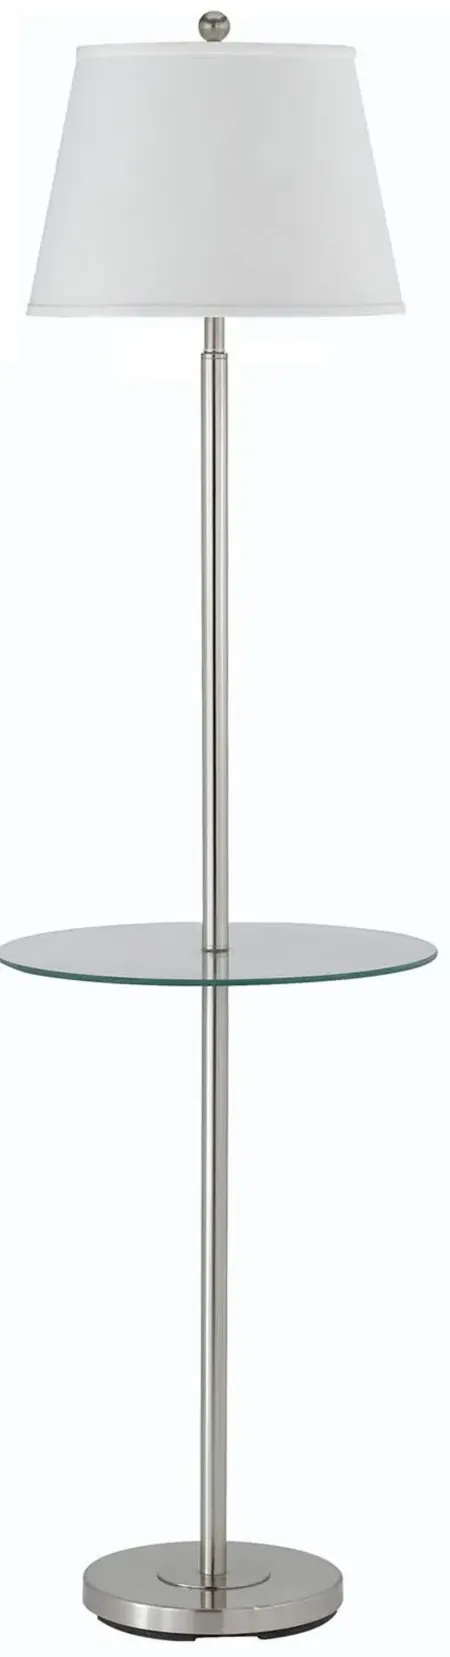 Floor Lamp with Glass Tray